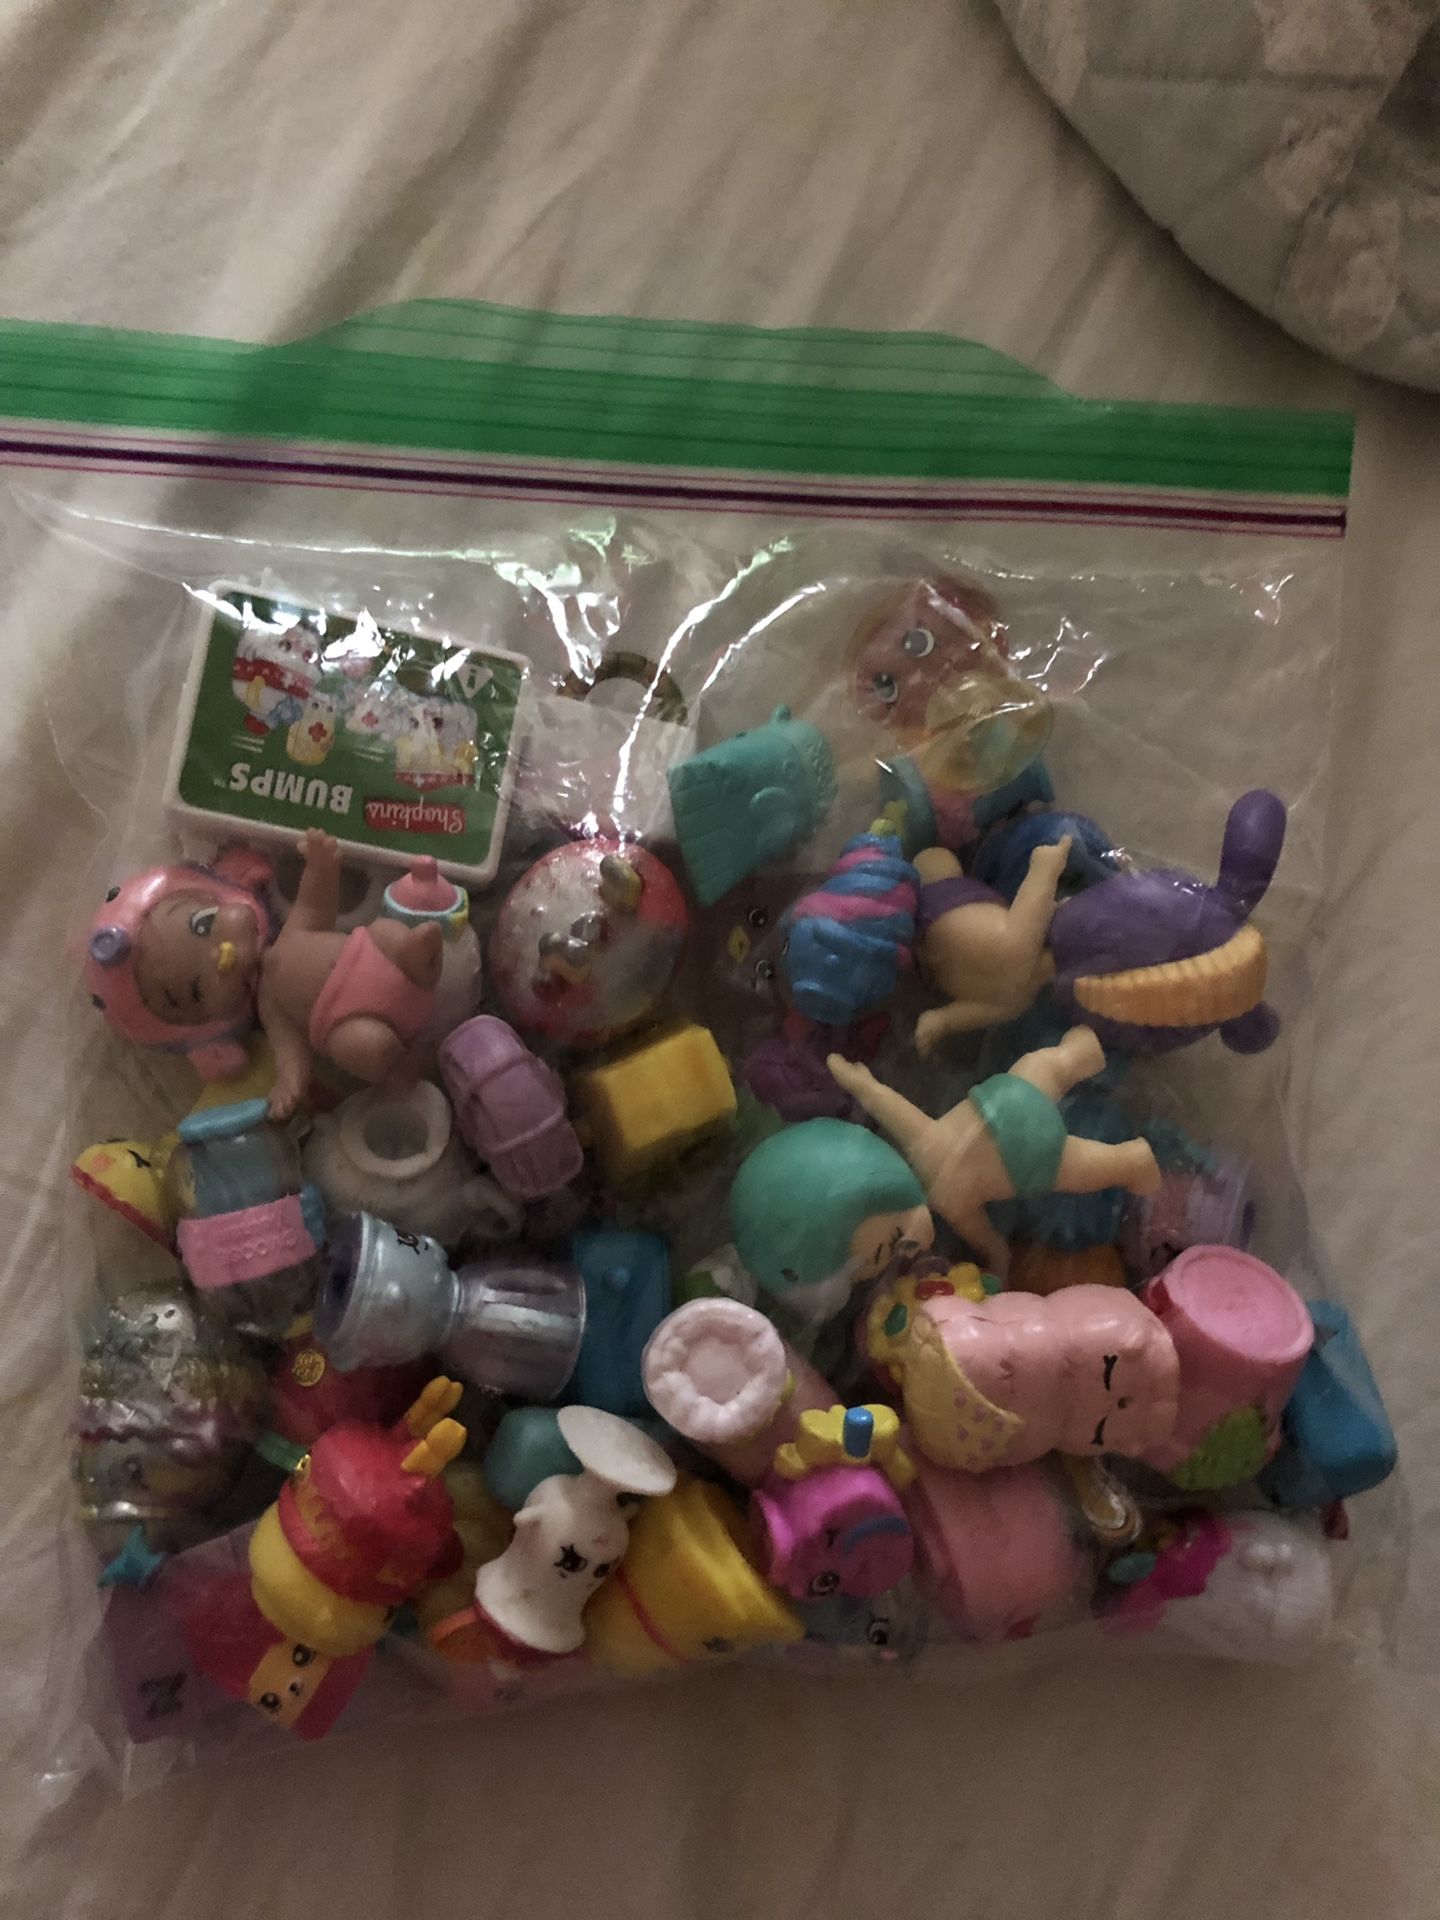 46 shopkins and 3 little baby dolls